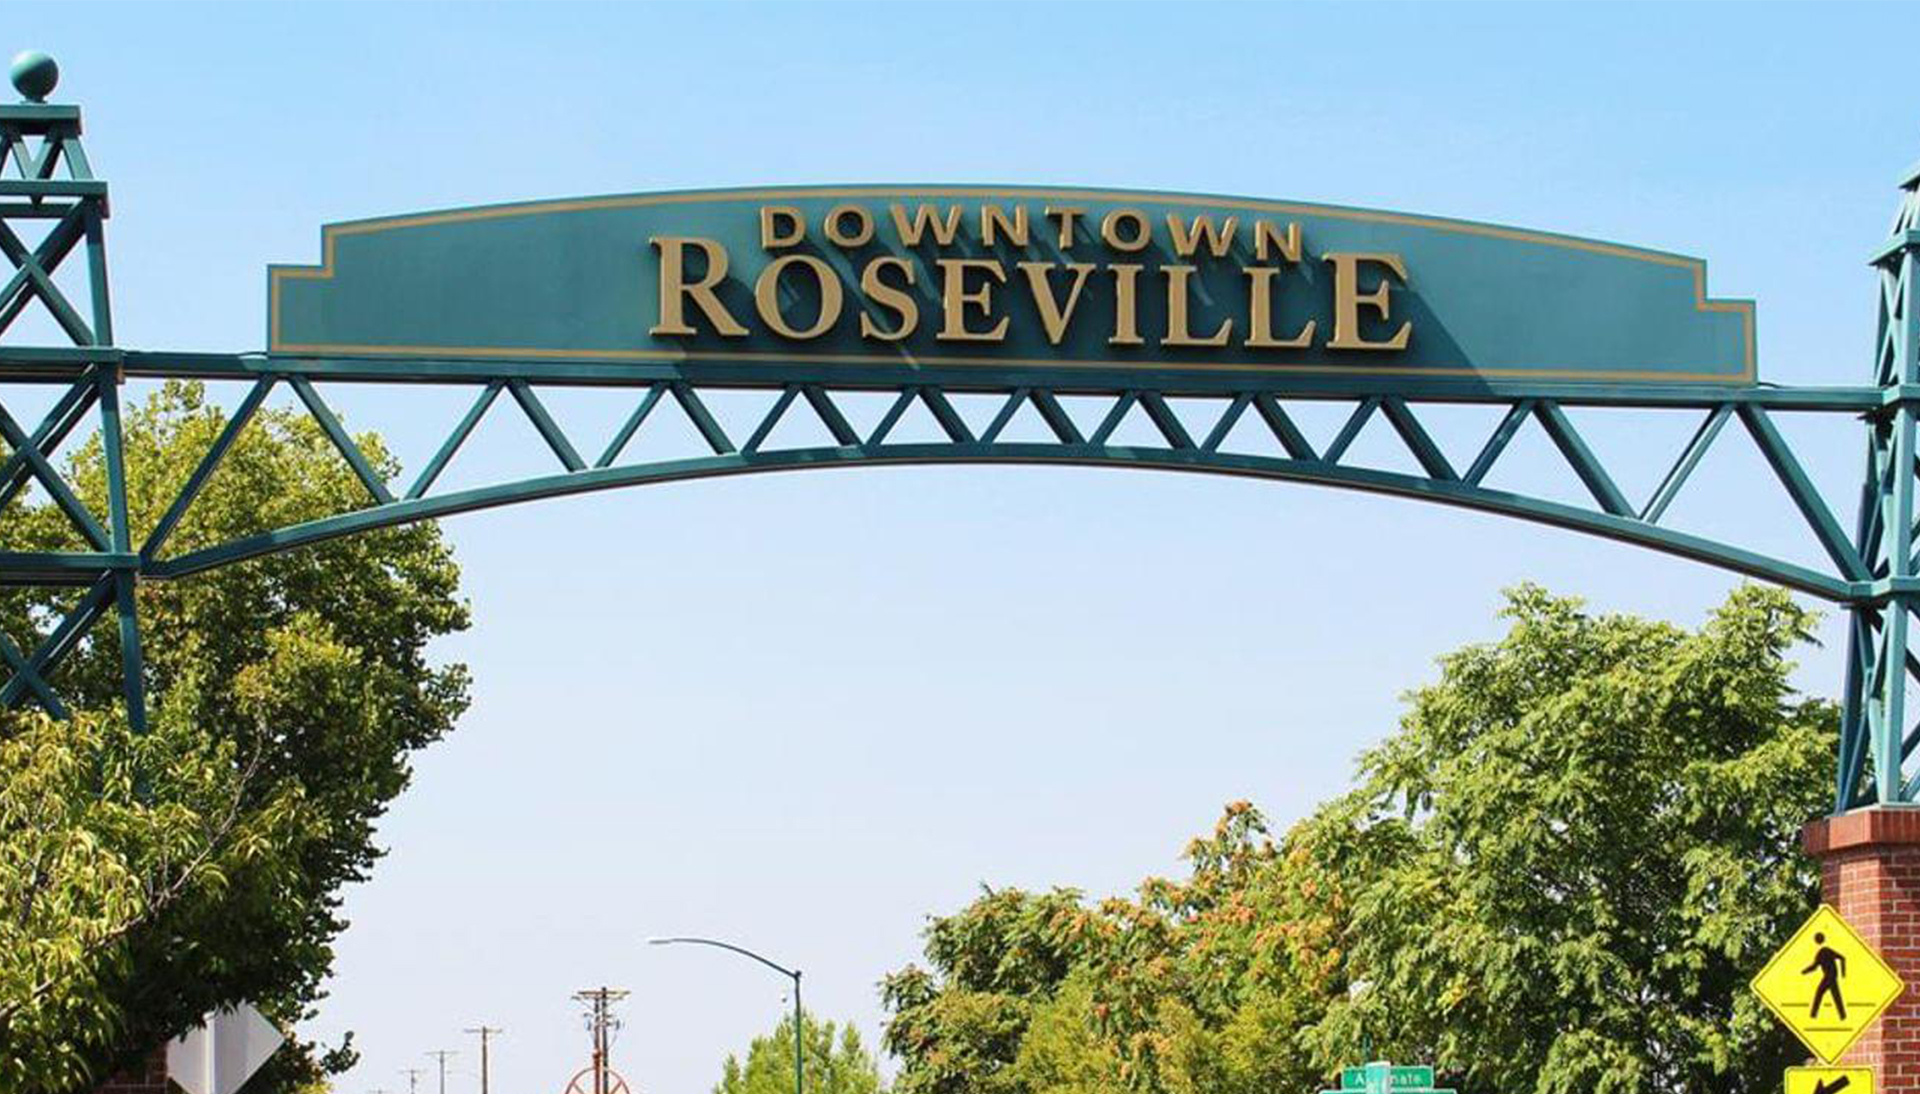 Local Appreciation Series: Getting to Know Roseville